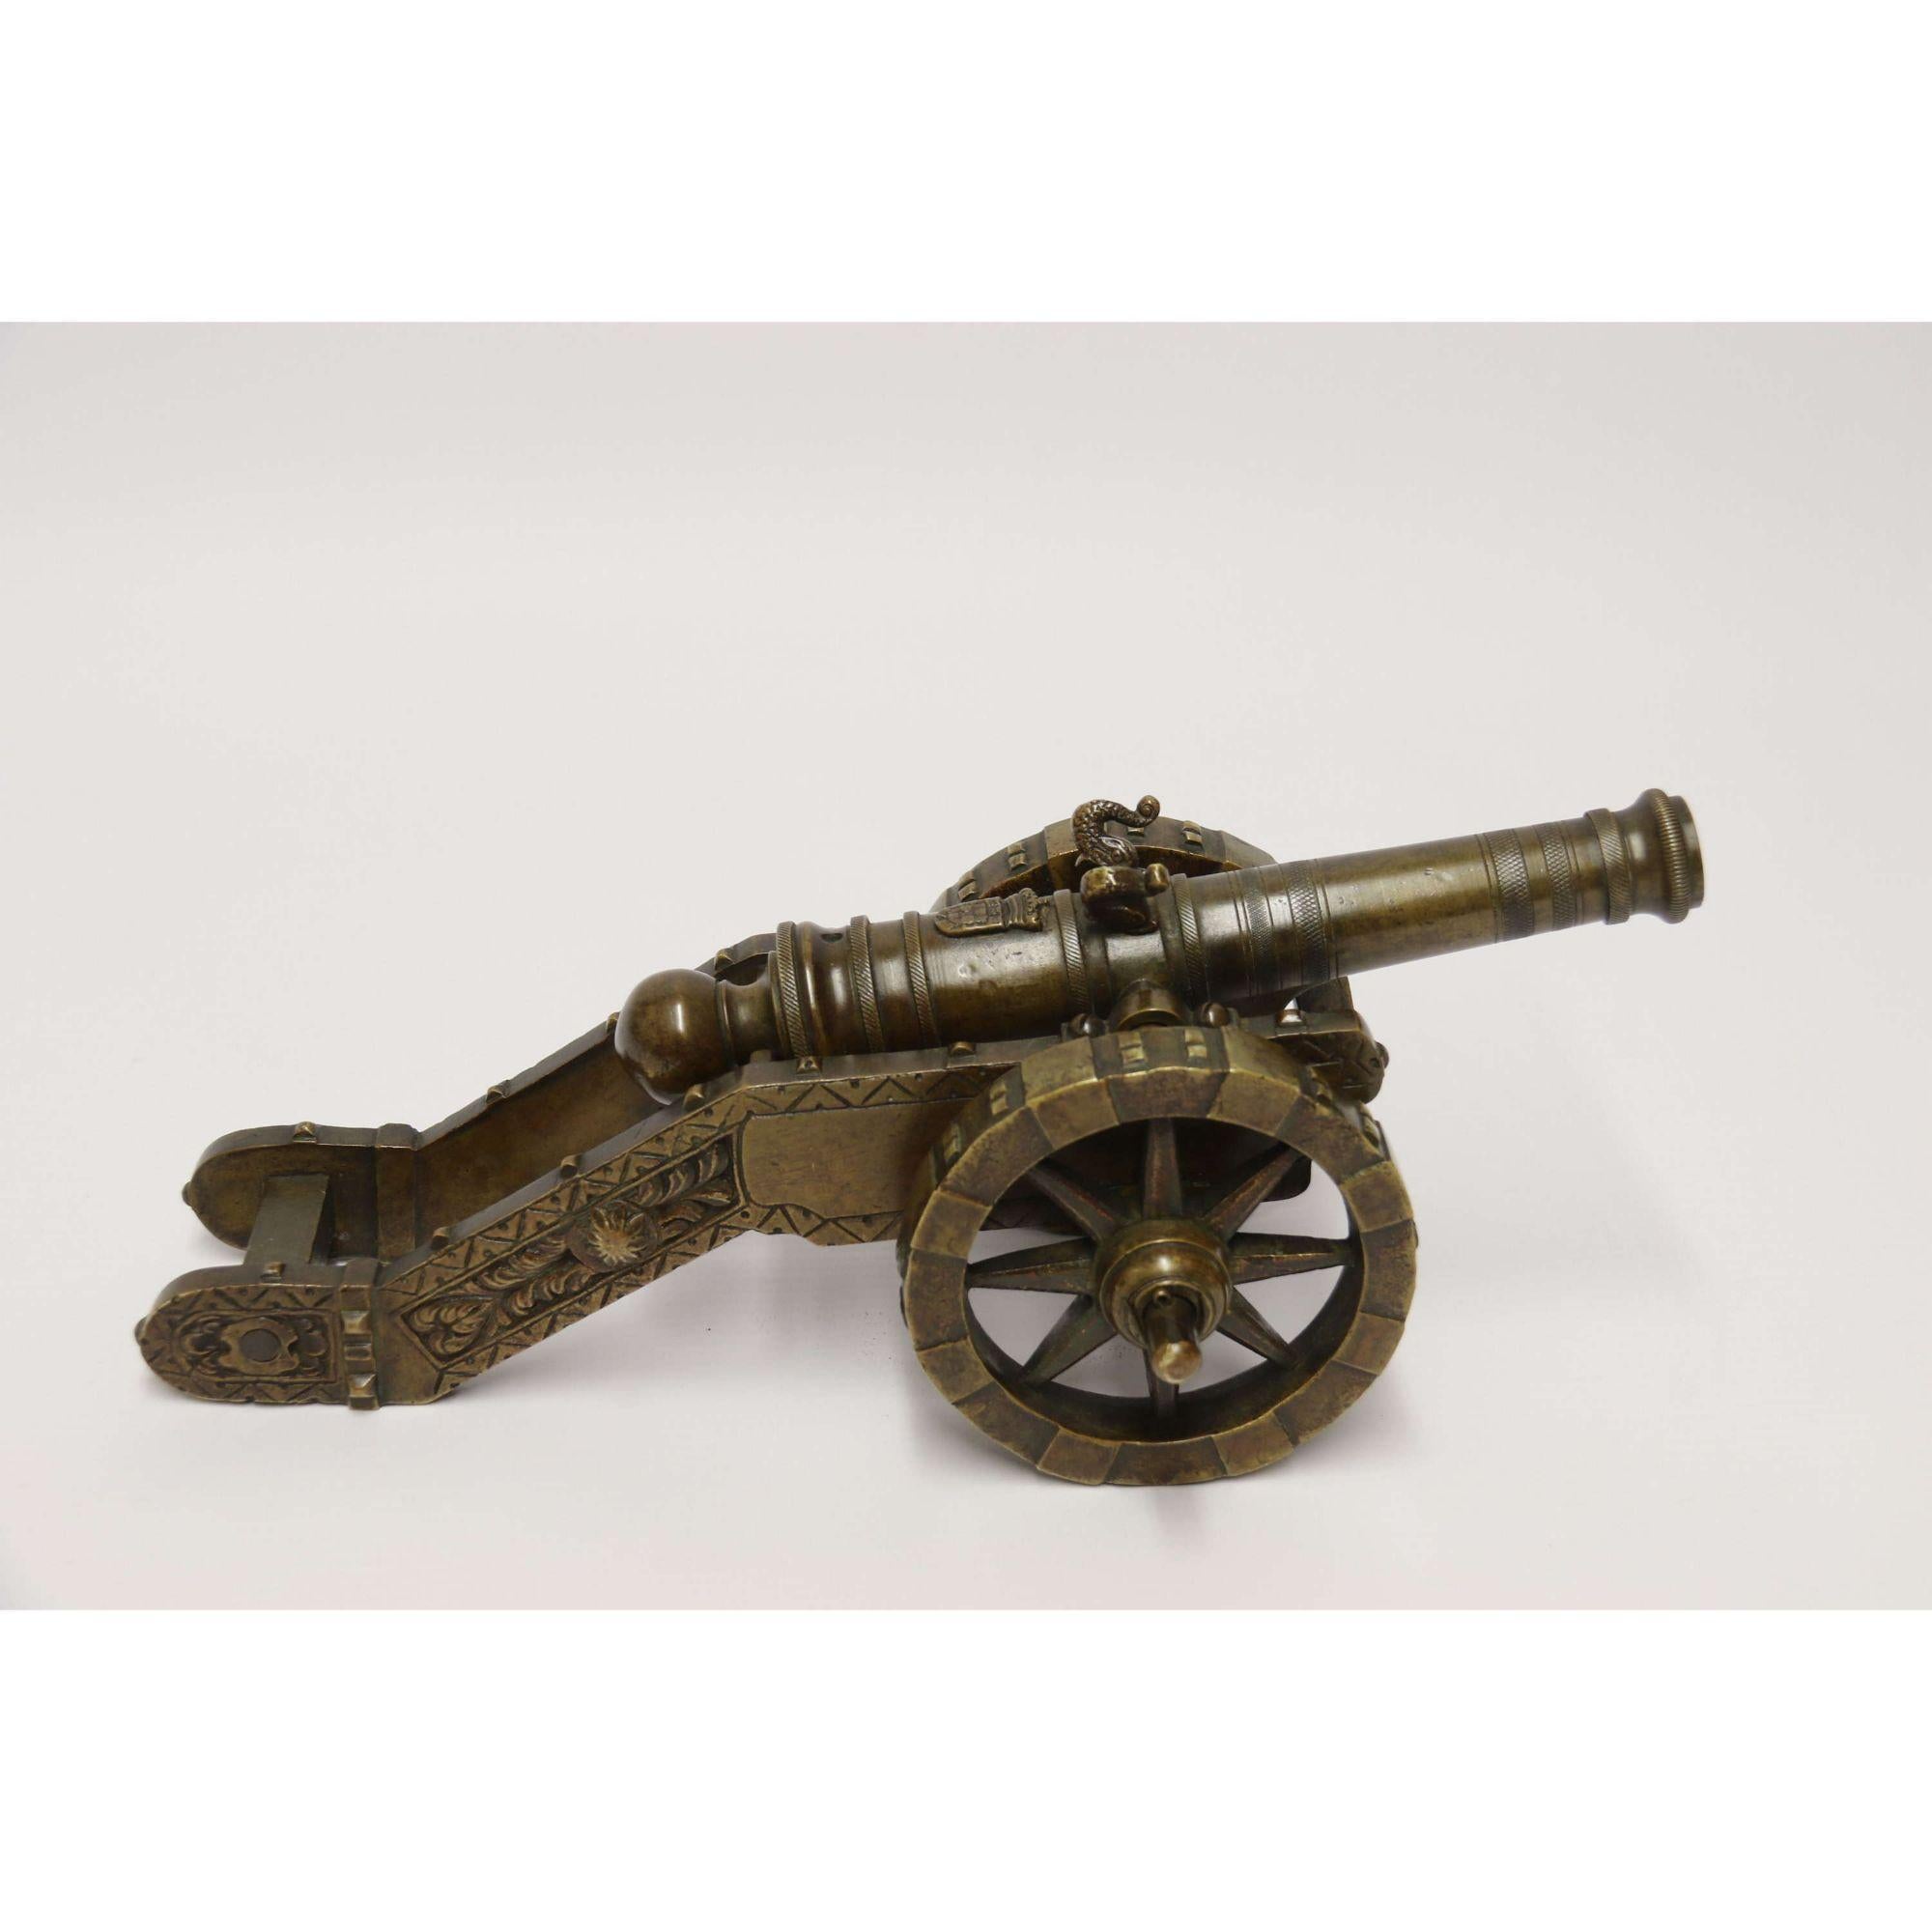 Patinated 19th century French bronze model medieval style cannon, circa 1890